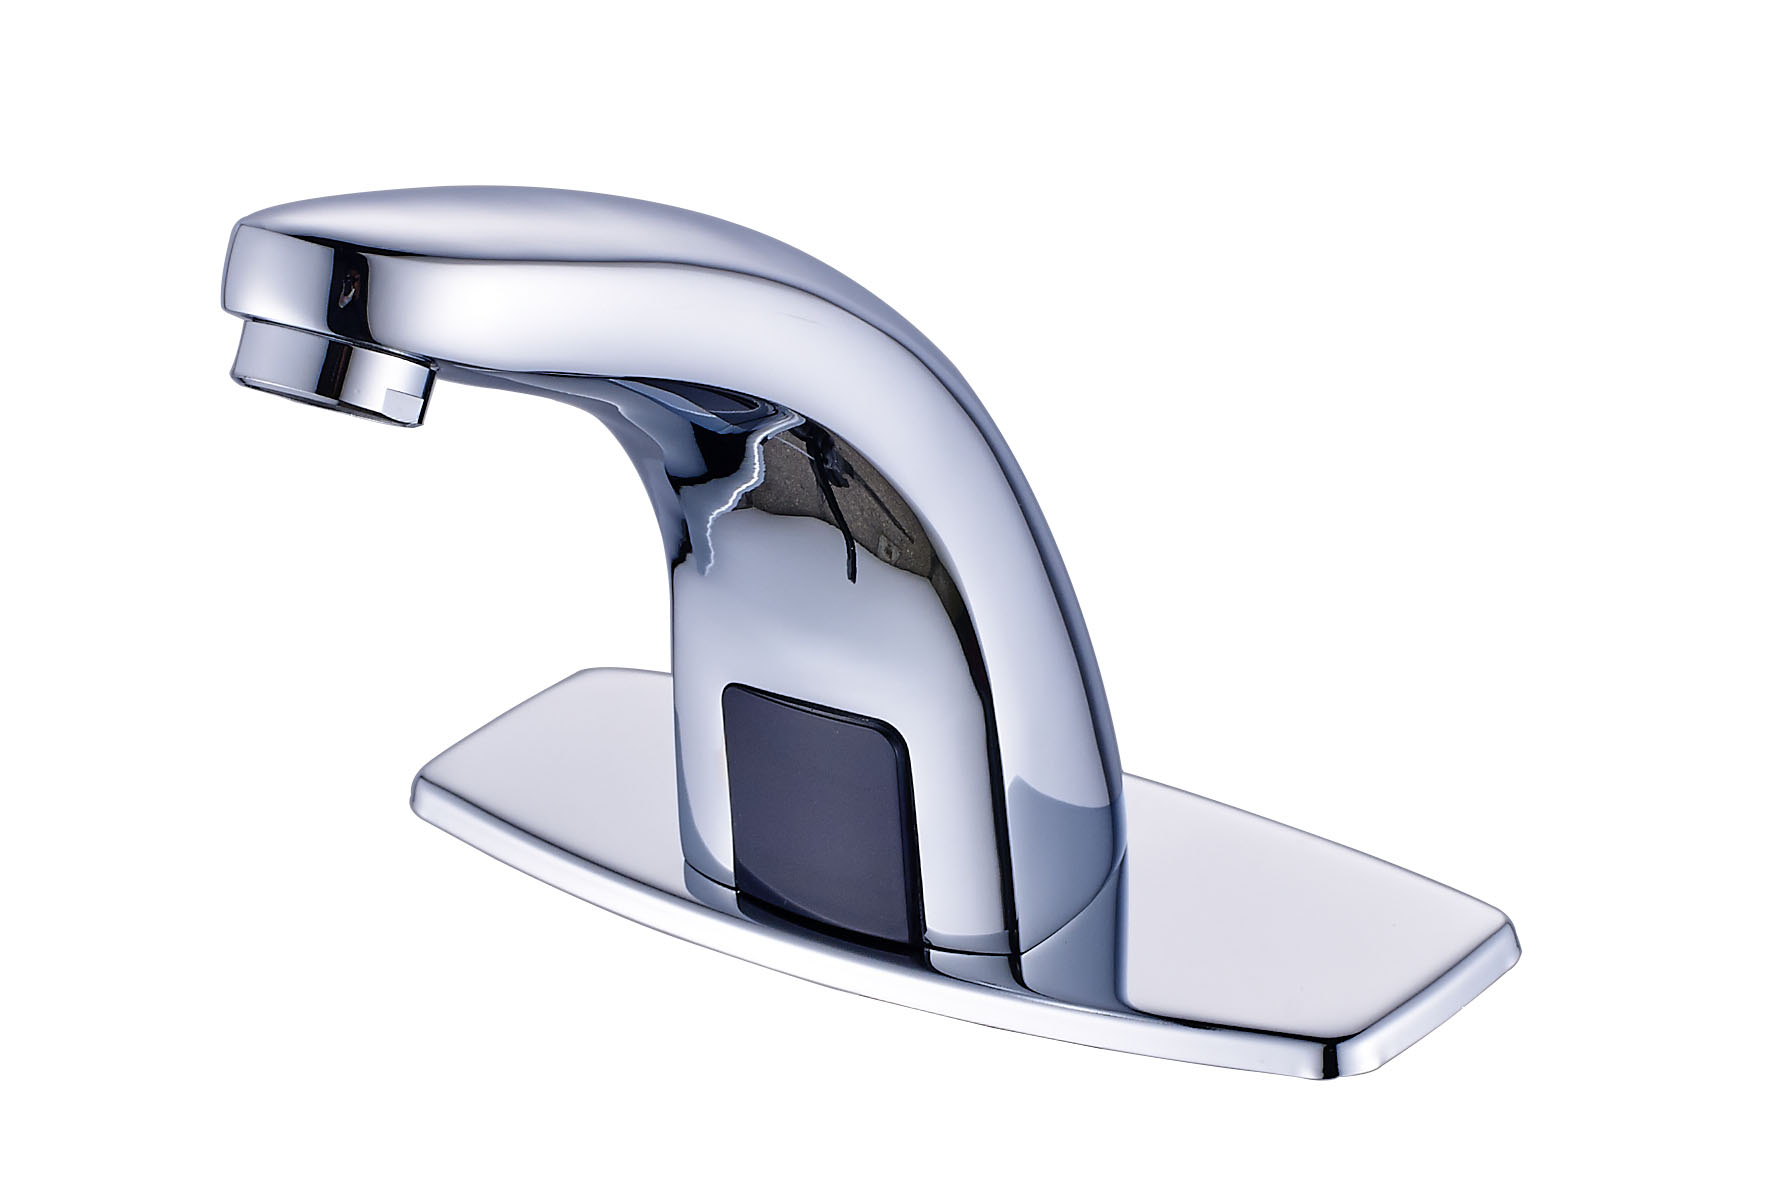 Chrome Automatic Sensor Touchless Bathroom Sink Faucet With Hole Cover Plate